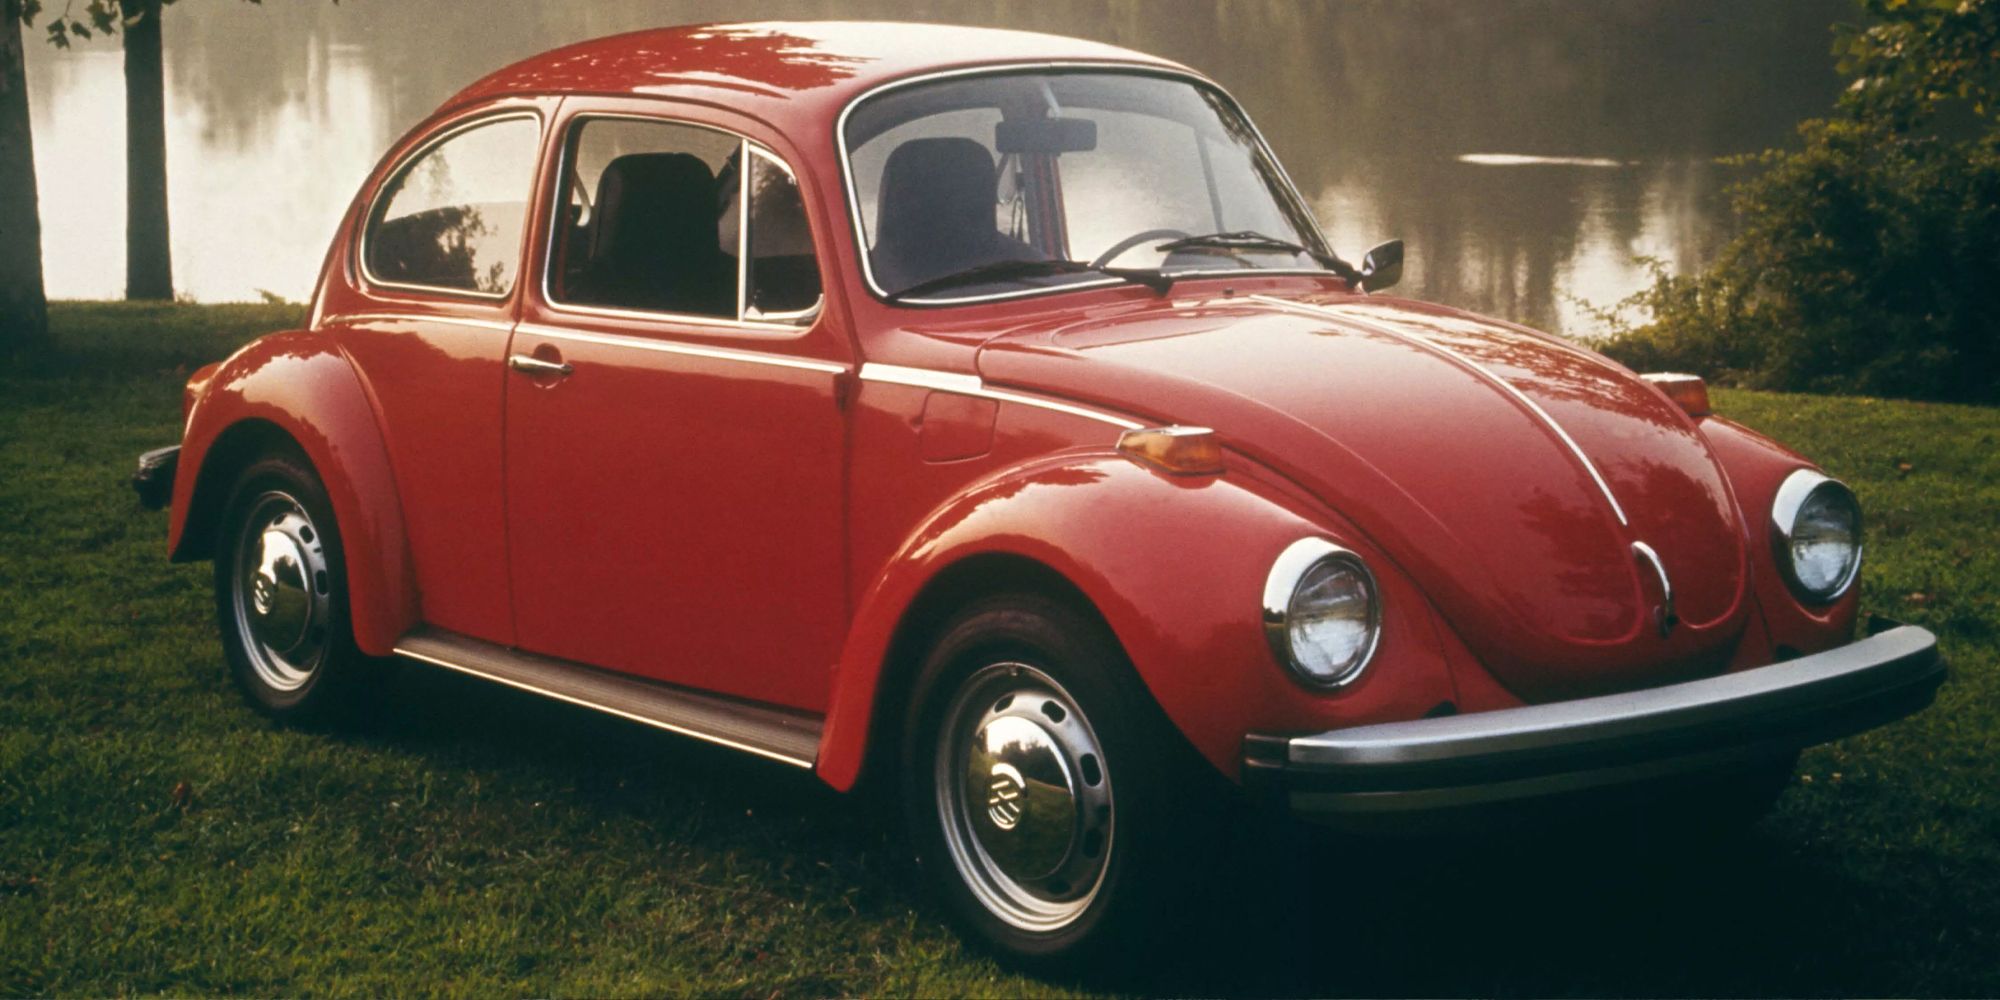 A standard red Beetle